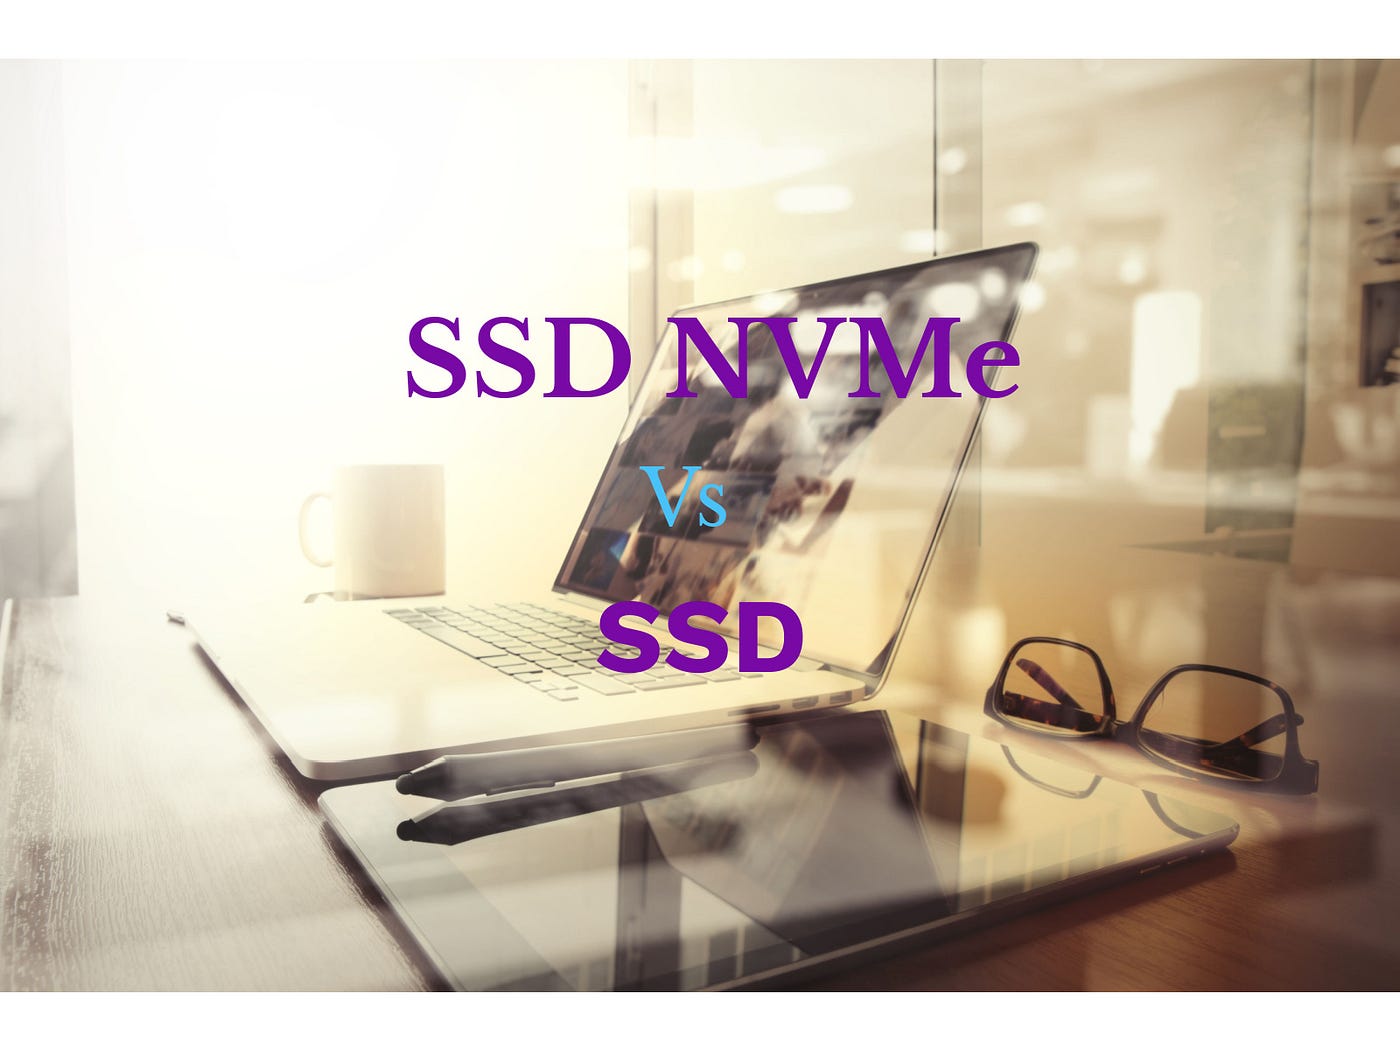 SSD NVMe Vs SSD: Deciding Their Differences, by Ann Taylor